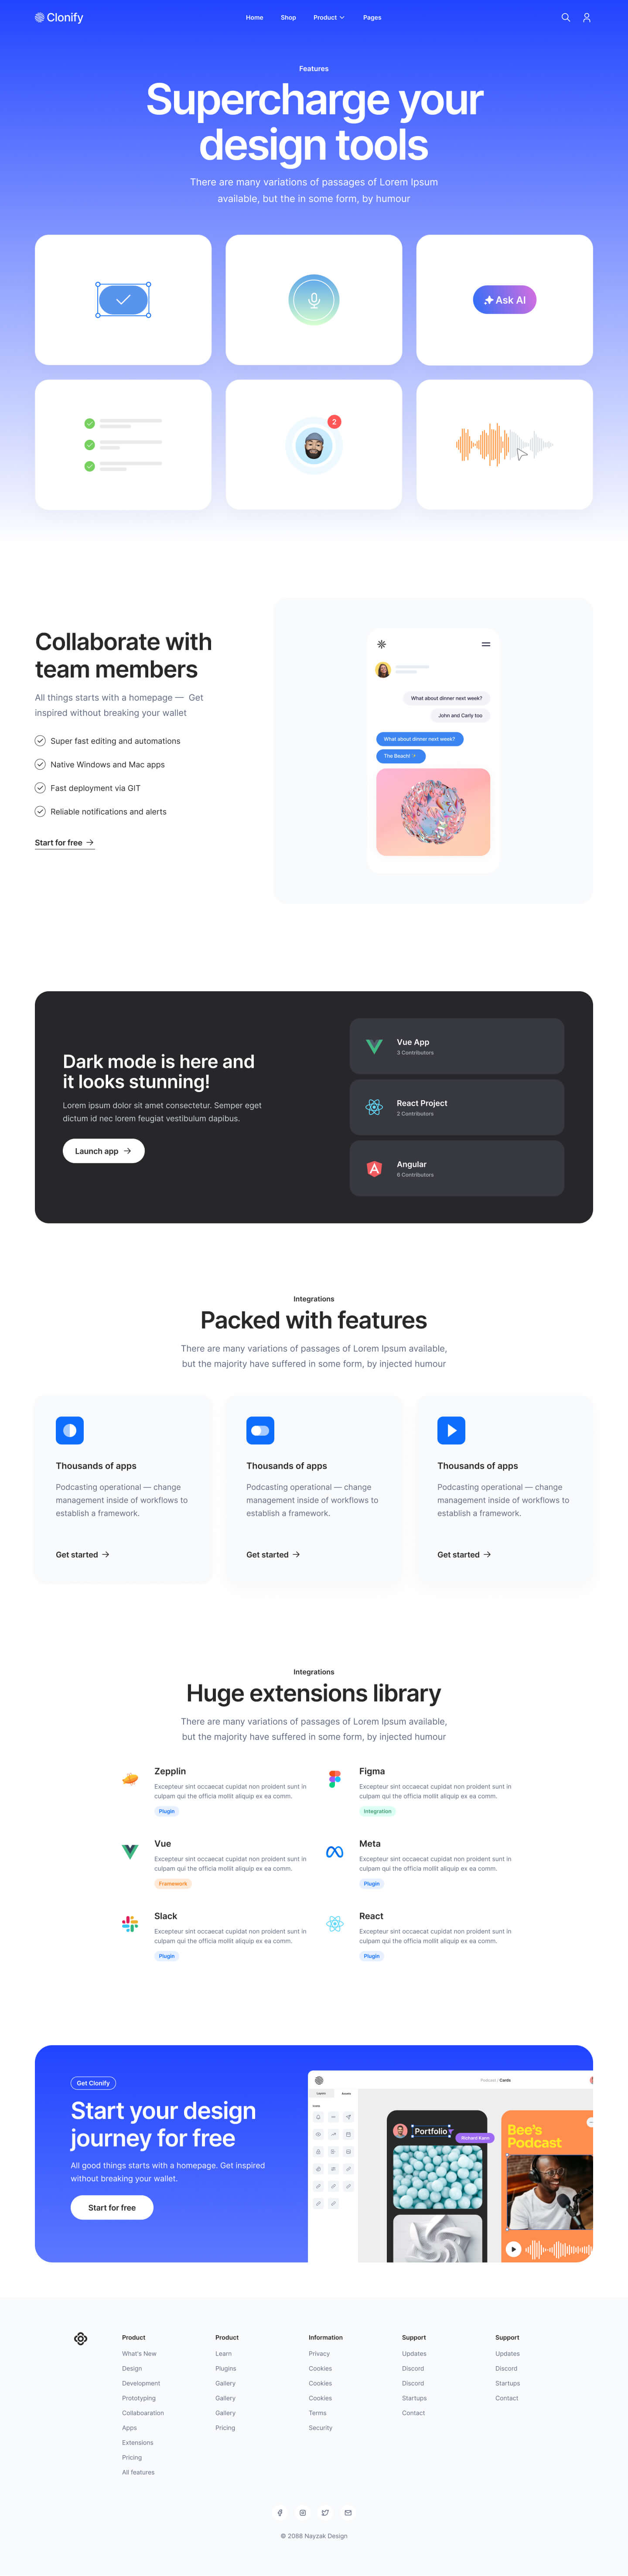 Features page